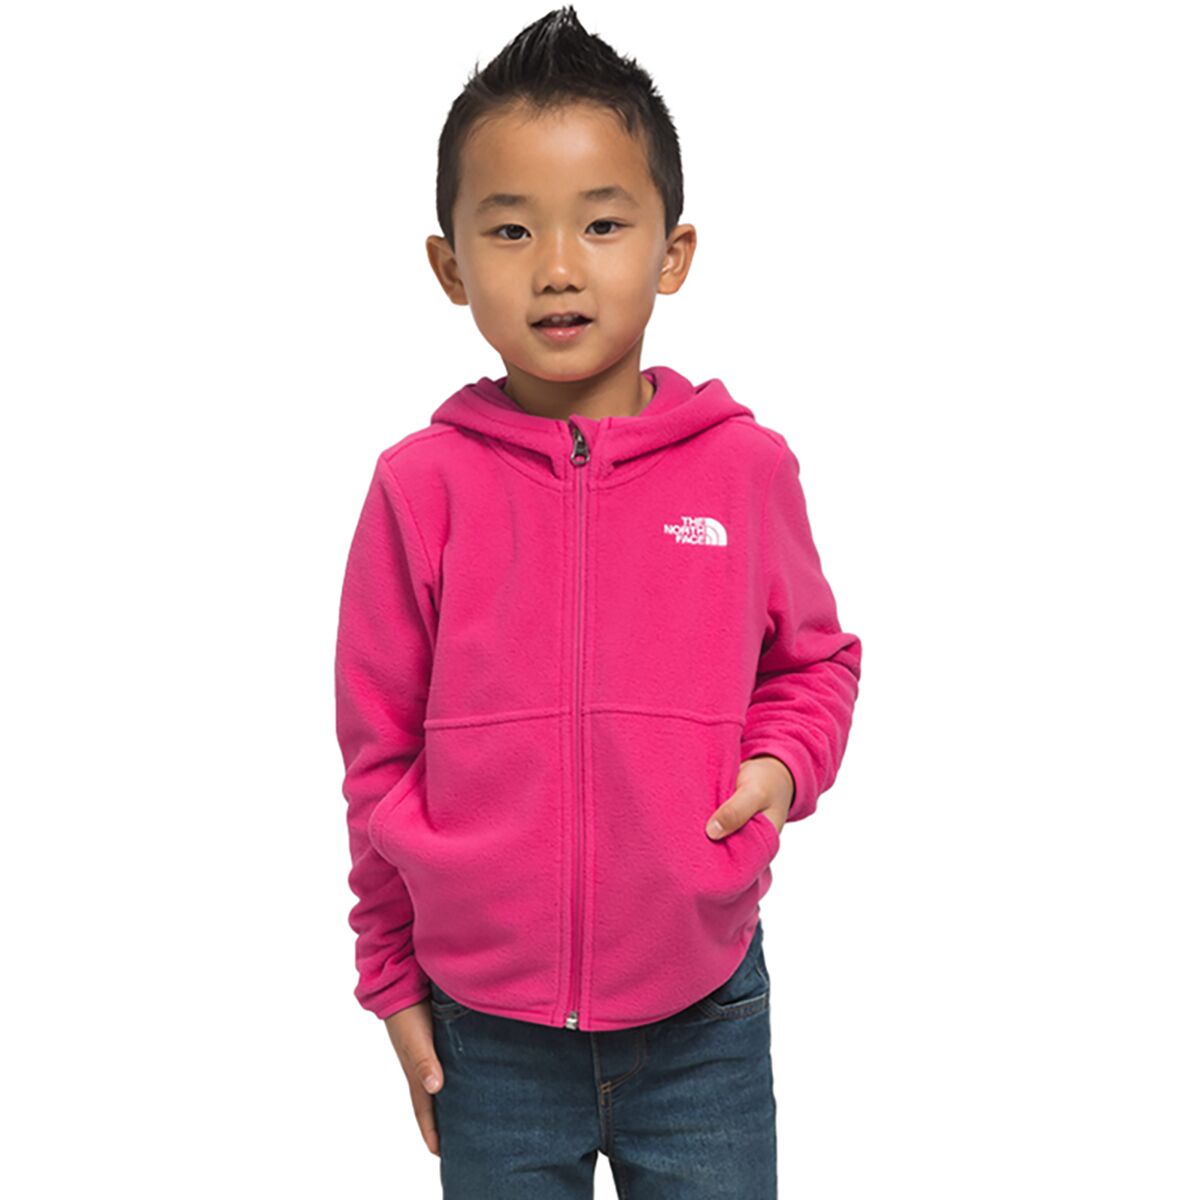 The North Face Glacier Full-Zip Hoodie - Toddlers